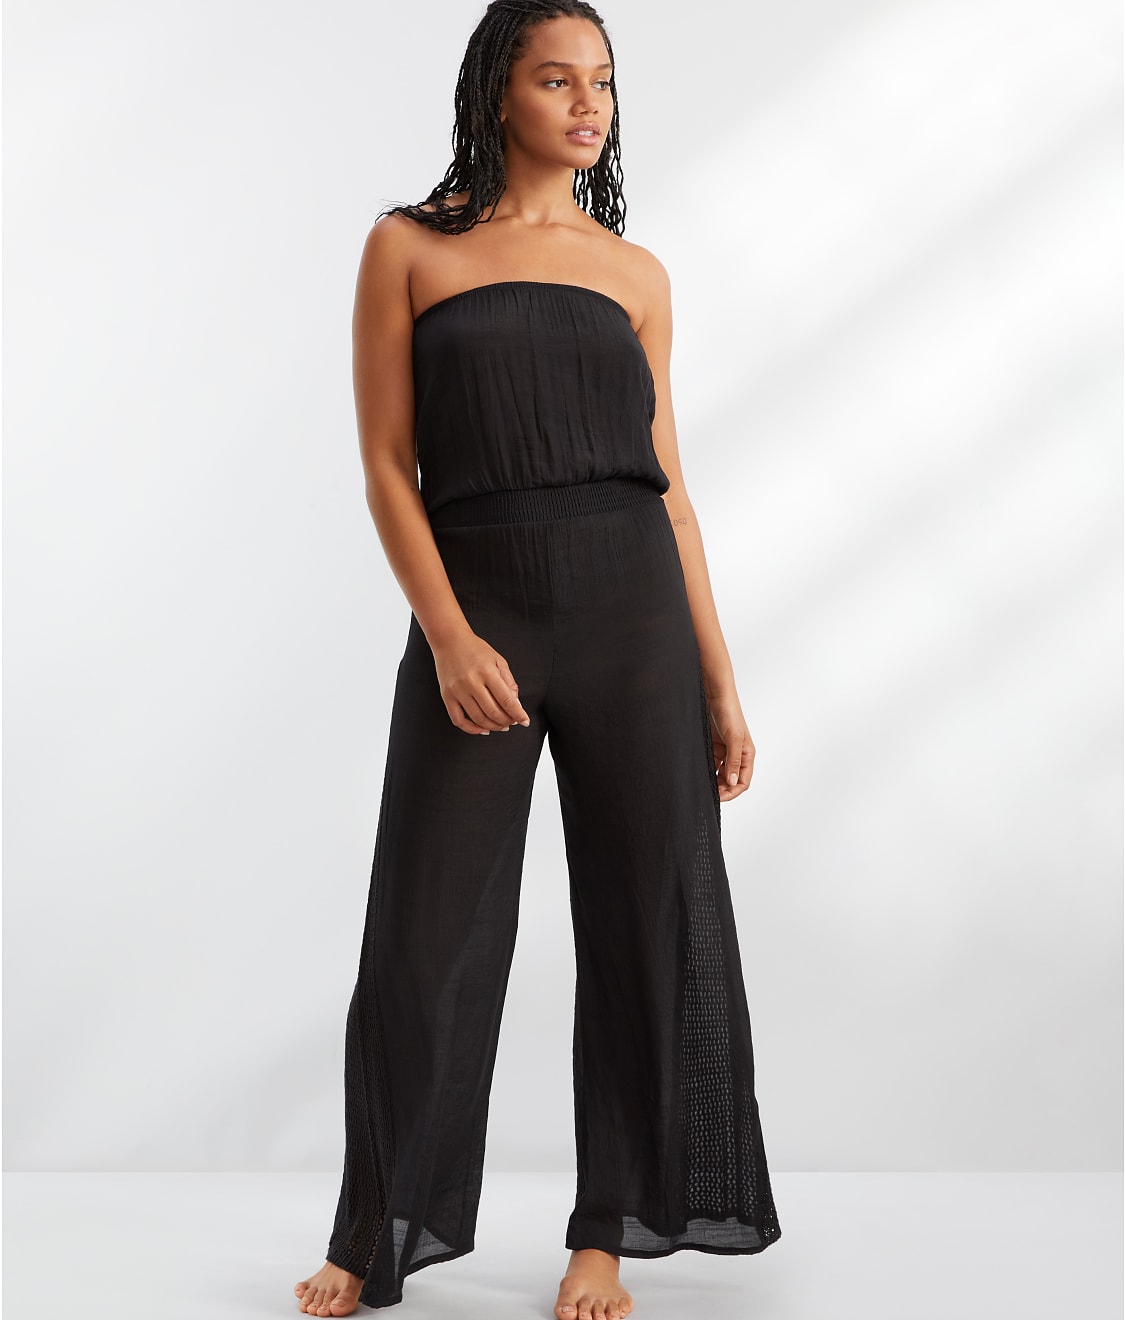 Strapless Jumpsuit Cover-Up | Bare Necessities